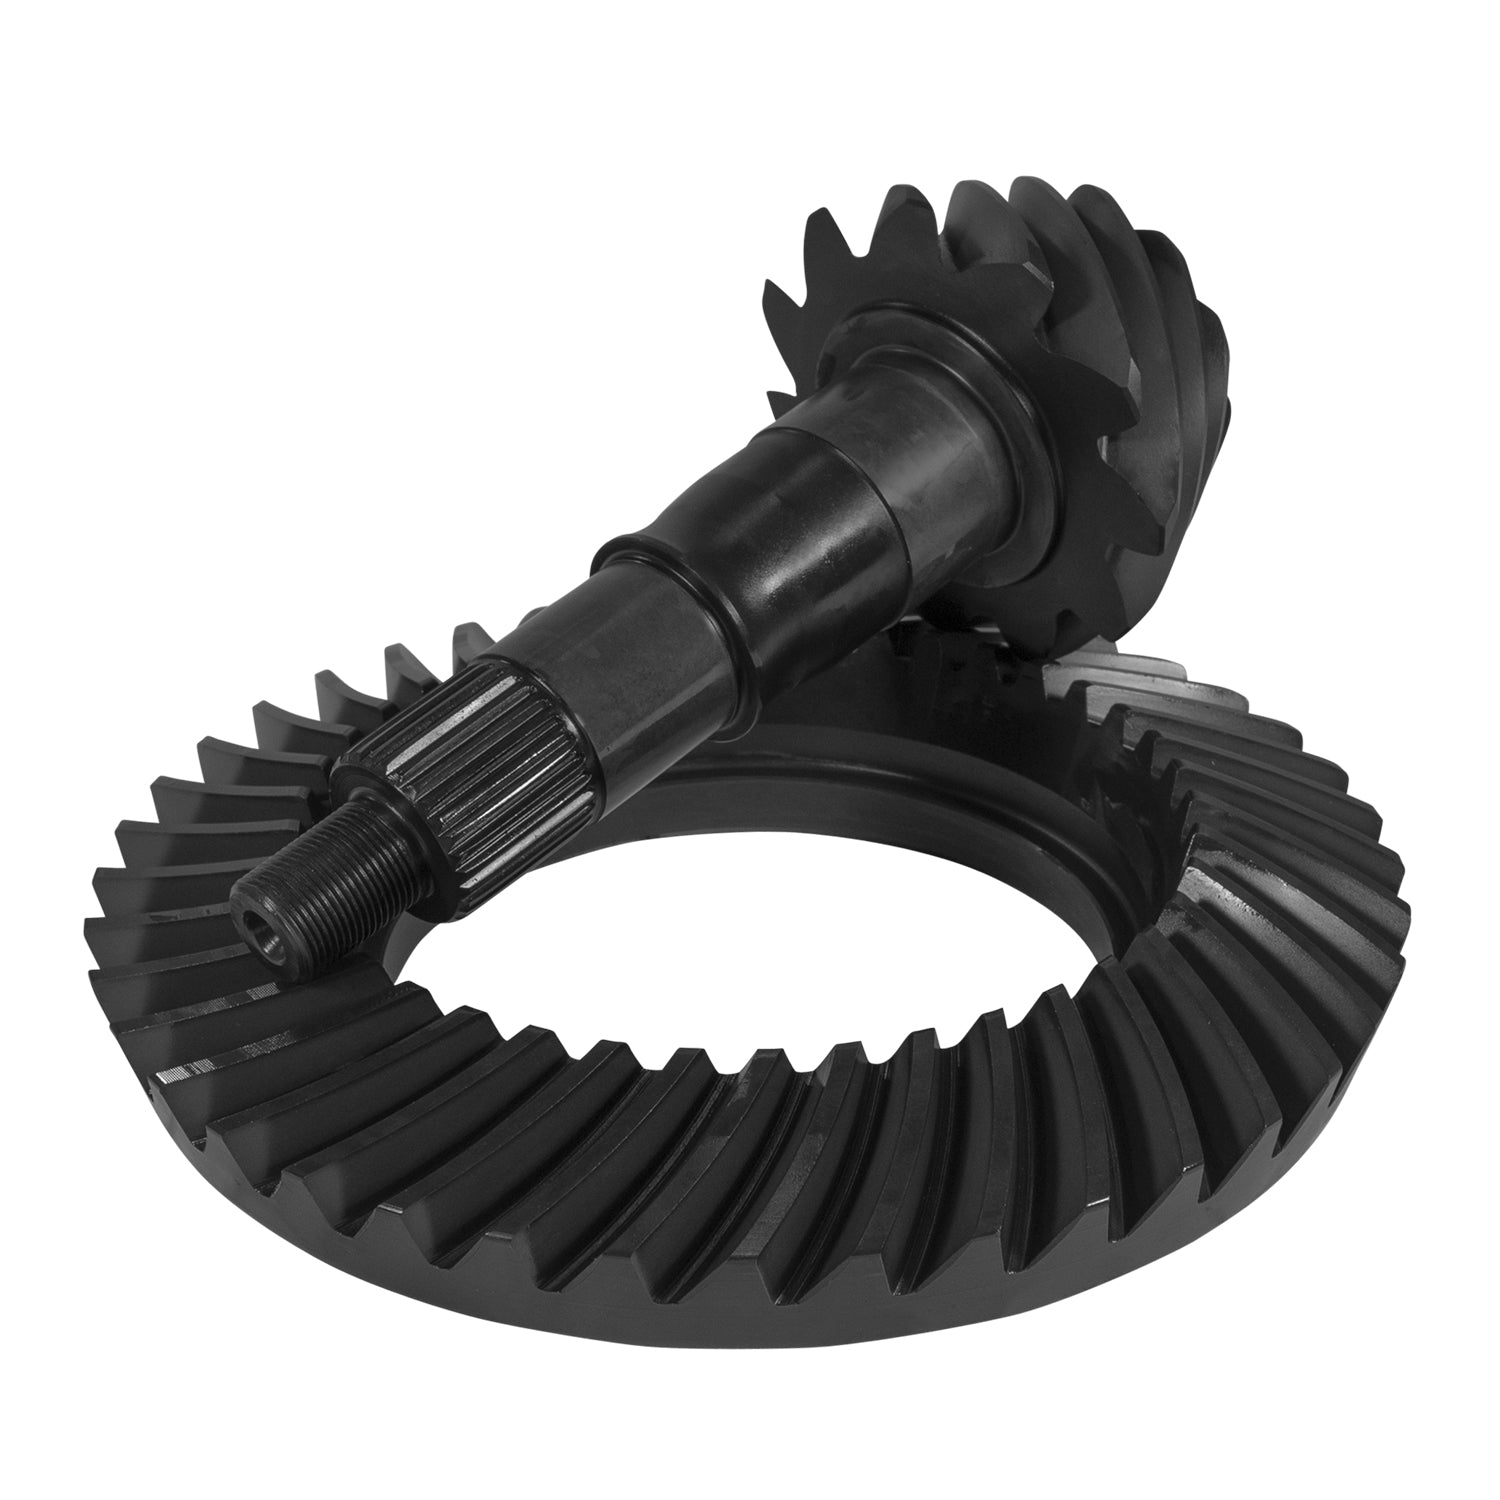 Yukon Gear Ford Lincoln Mercury Differential Ring and Pinion Kit - Rear YGK2383